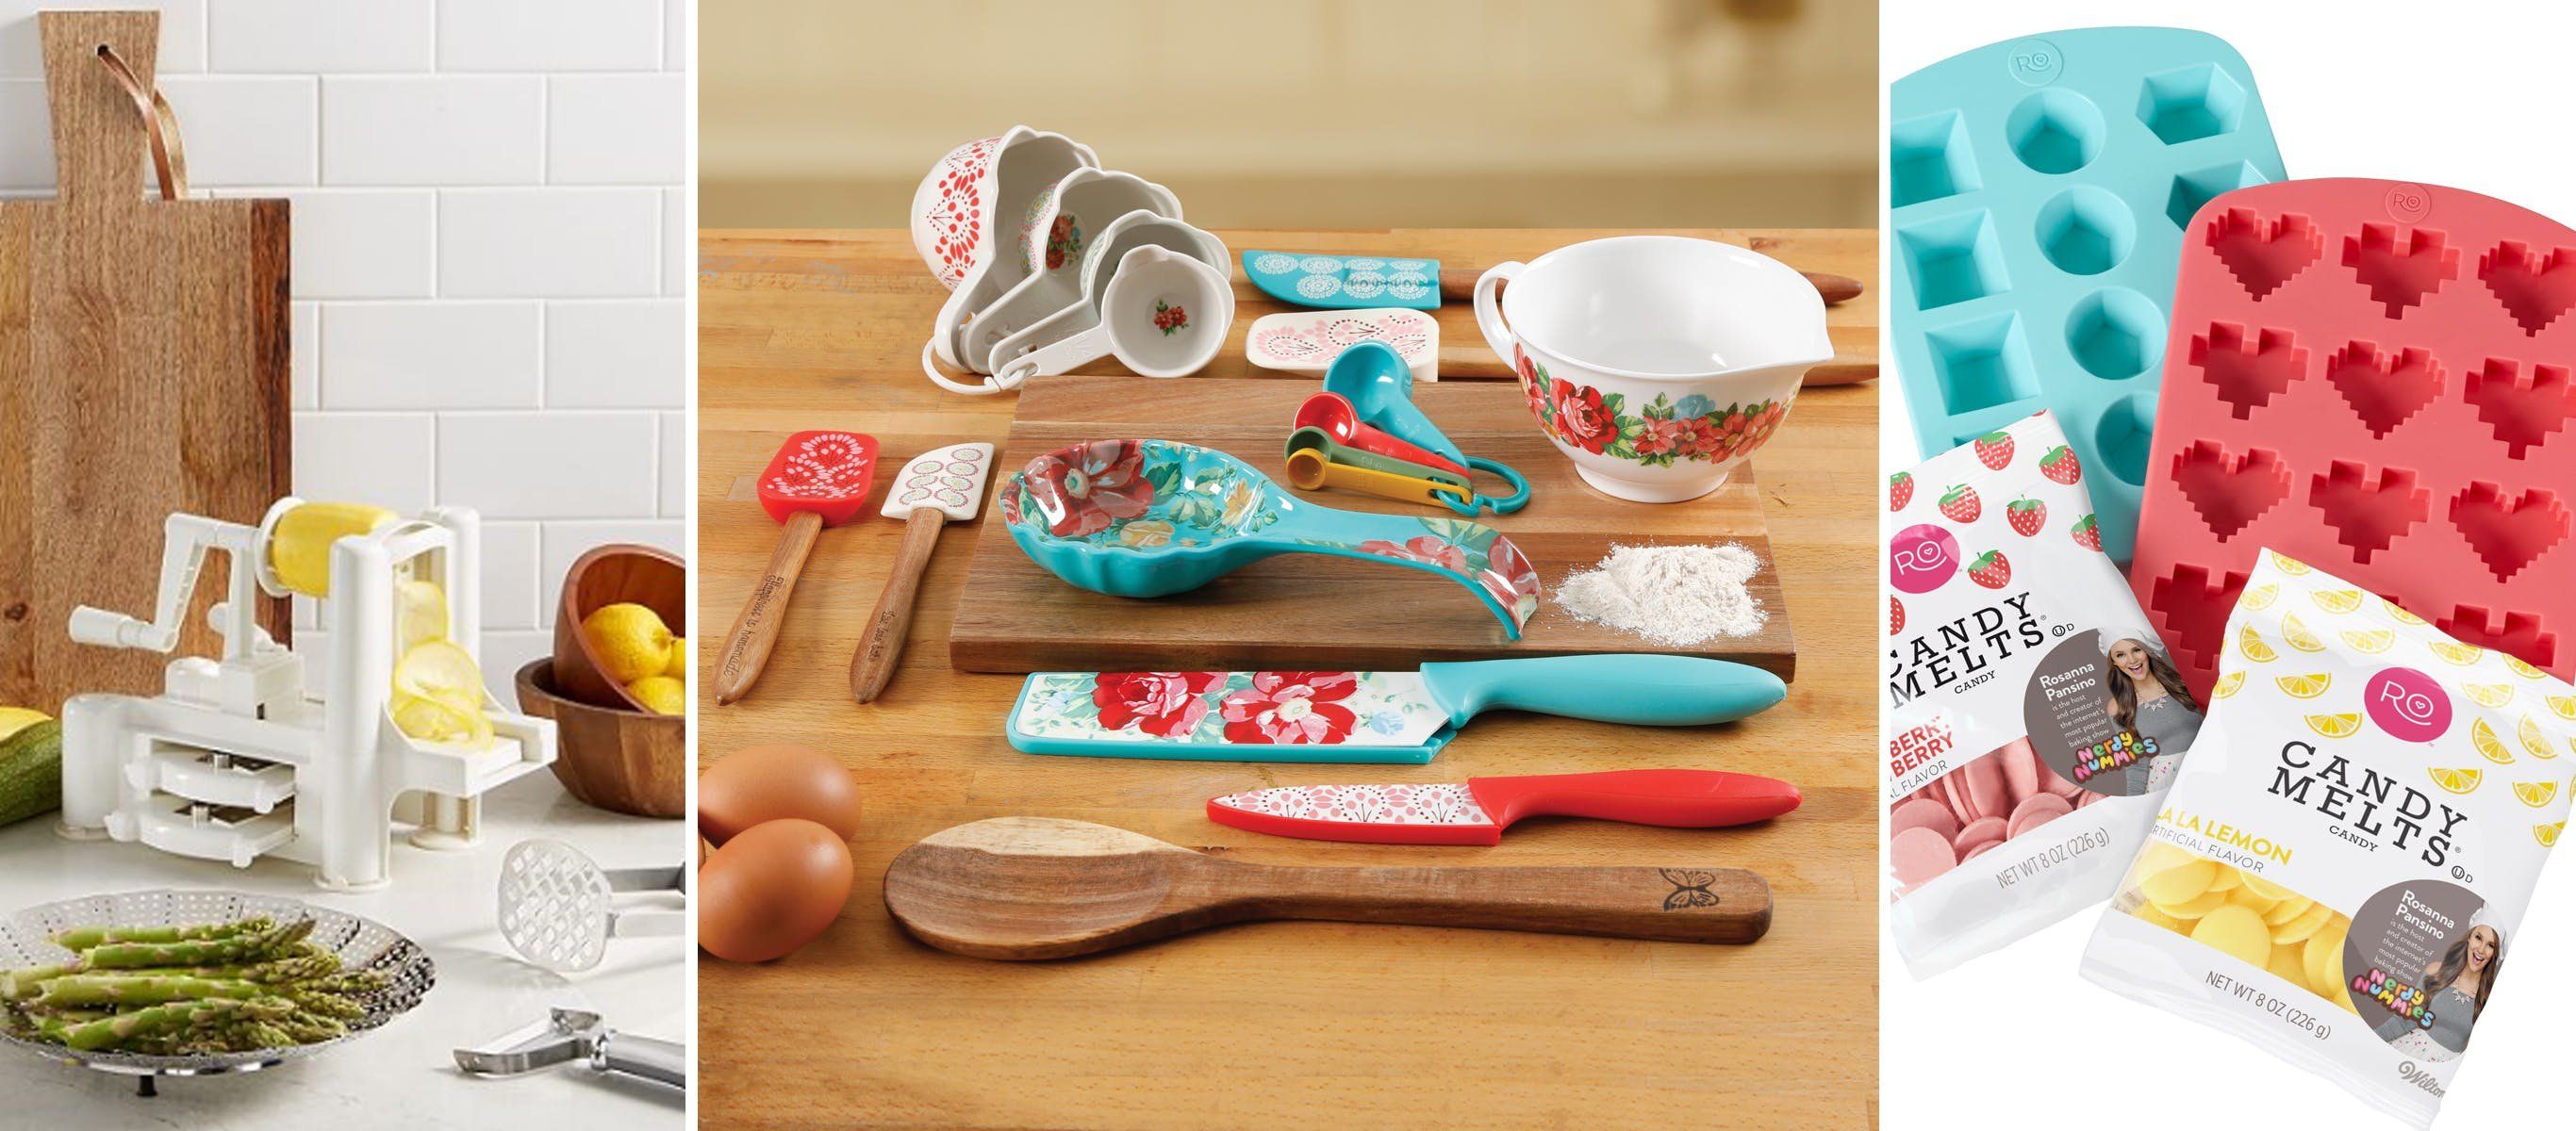 Pioneer Woman Kitchen Items Are on Sale Starting at Just $19